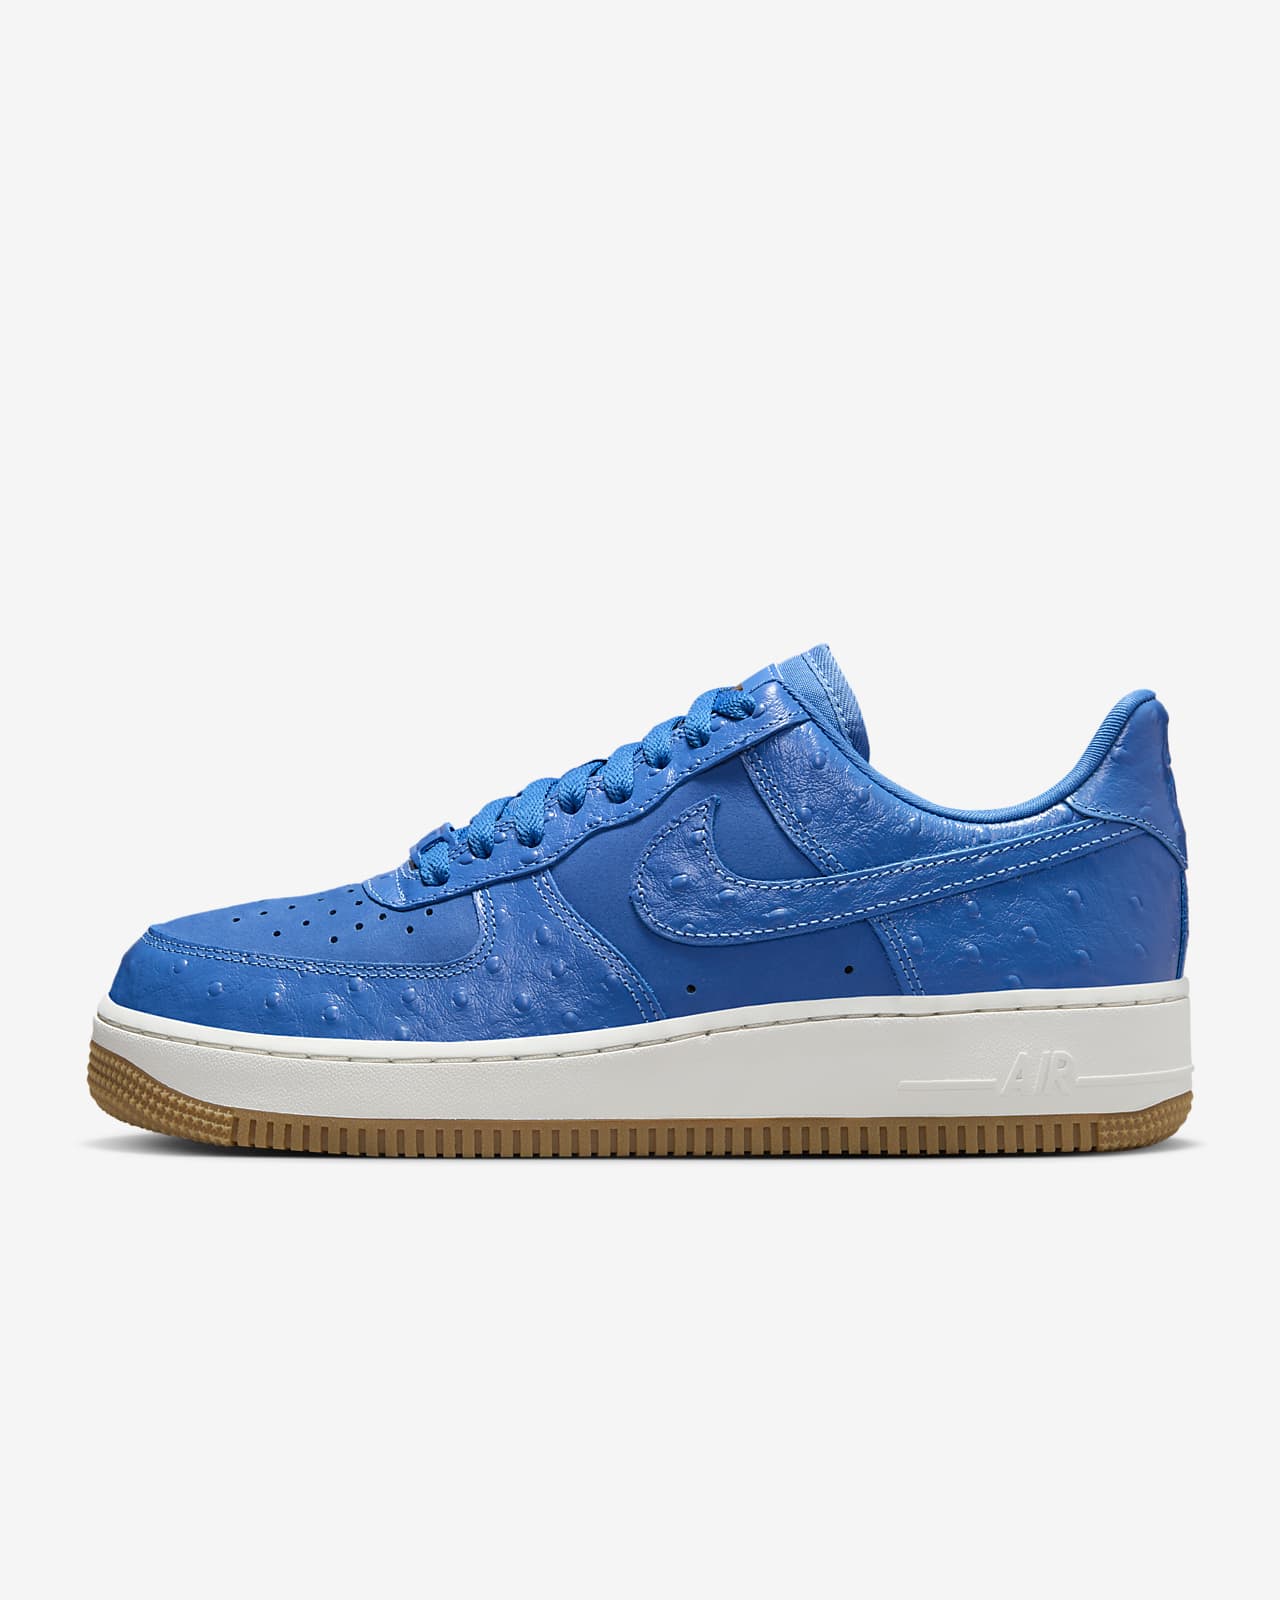 Chaussure Nike Air Force 1 '07 LX pour femme